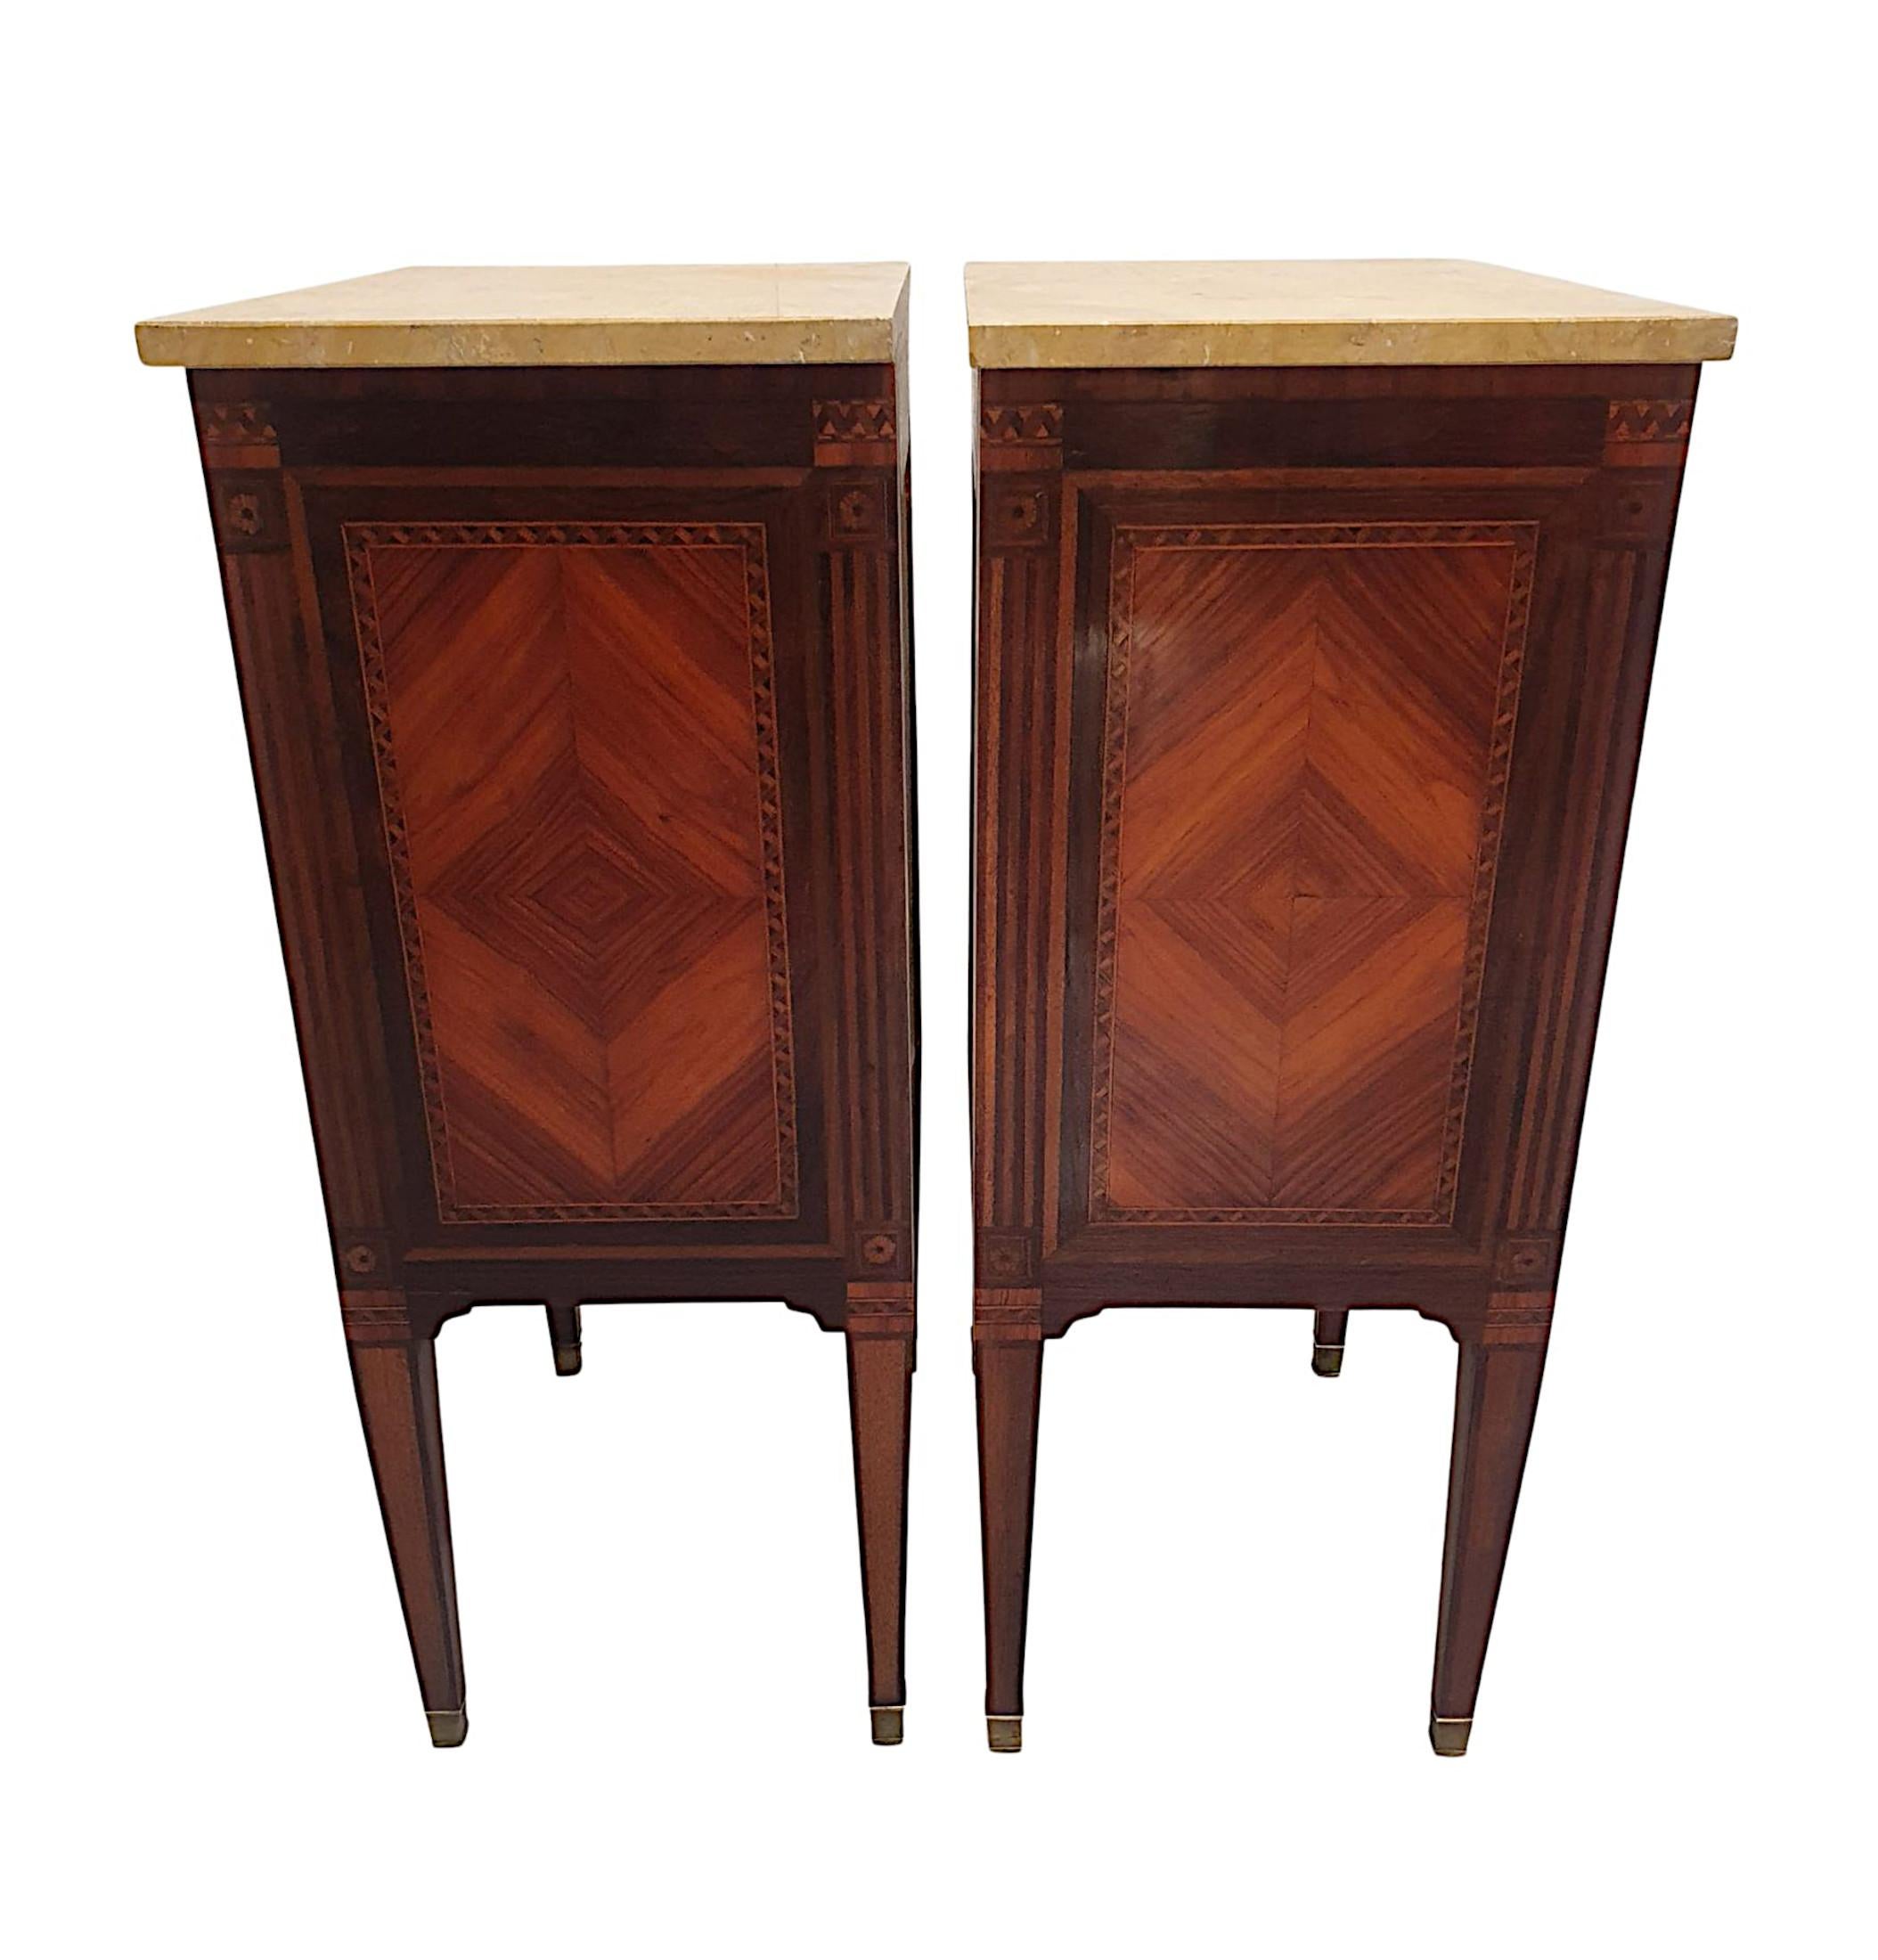 A Fine Pair of Early 20th Century Highly Inlaid Marble Top Bedside Chests For Sale 1